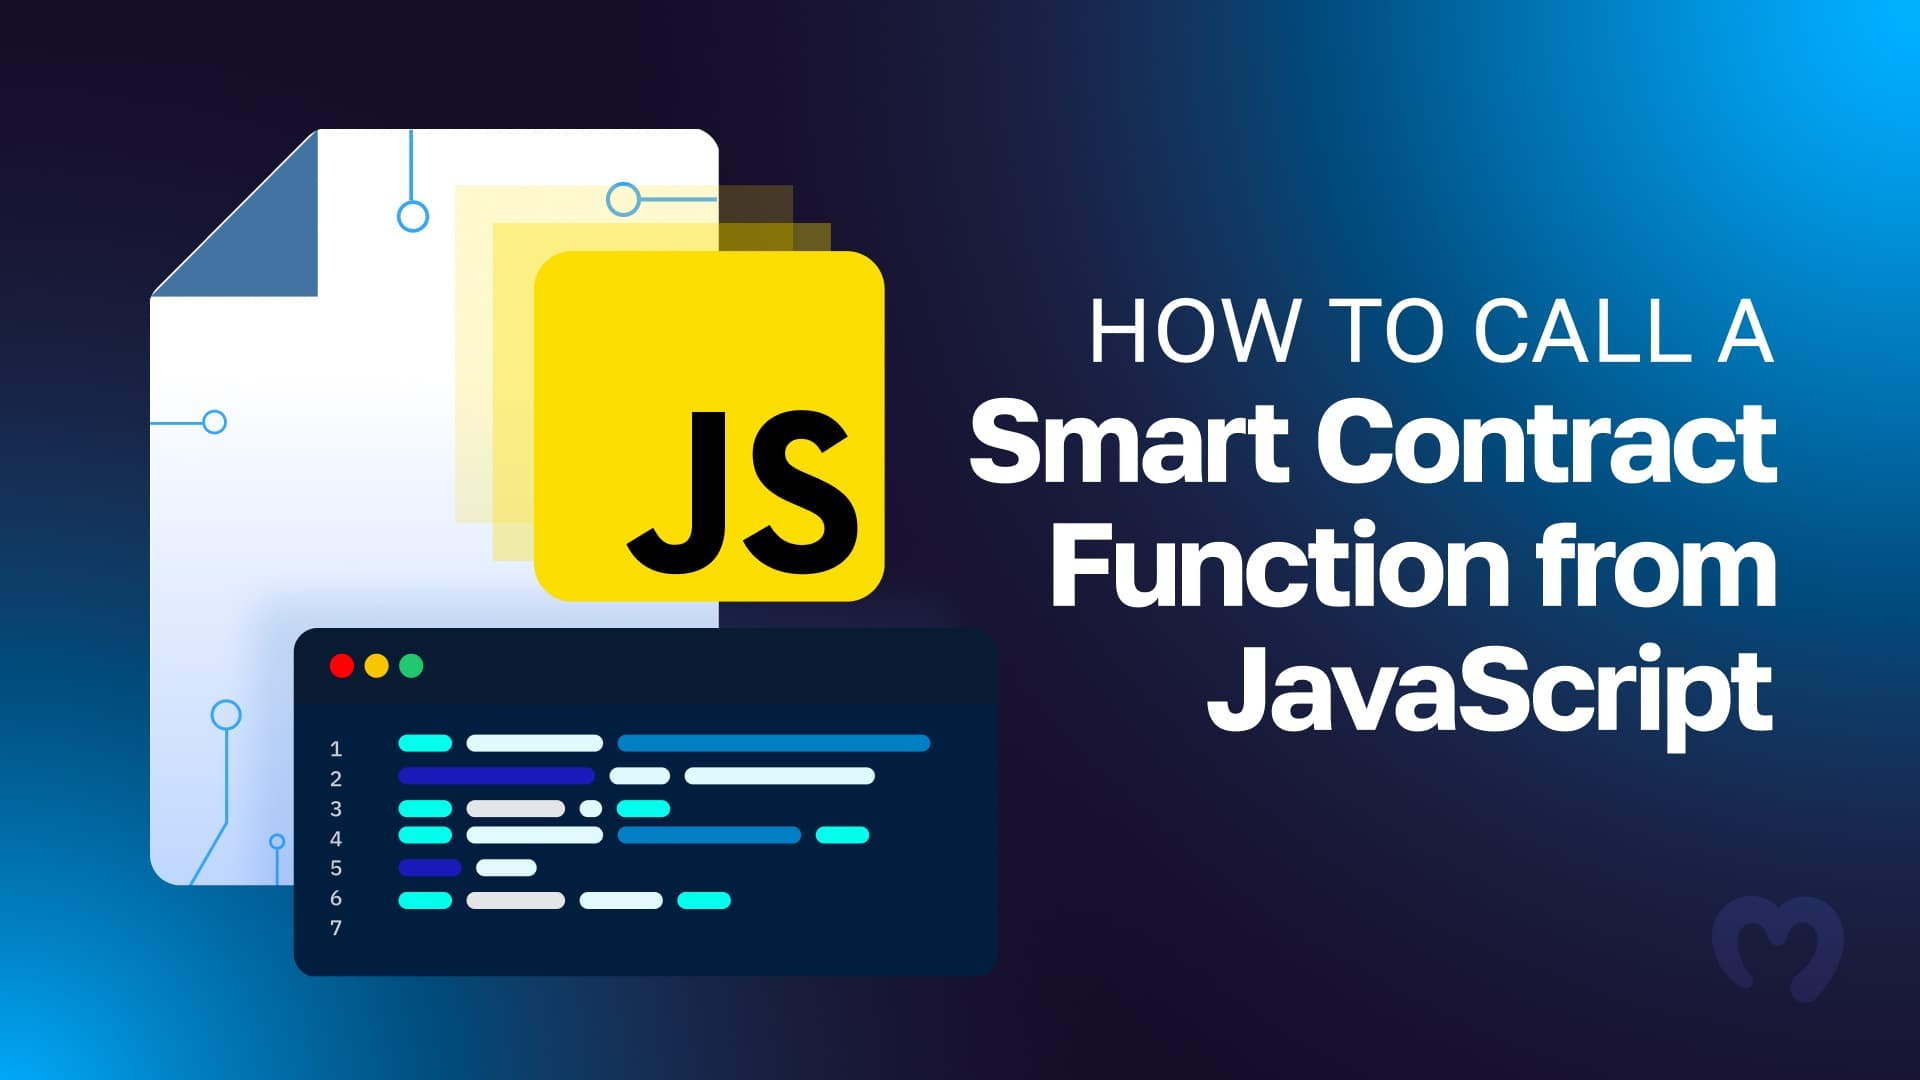 Exploring How to Call a Smart Contract Function from JavaScript